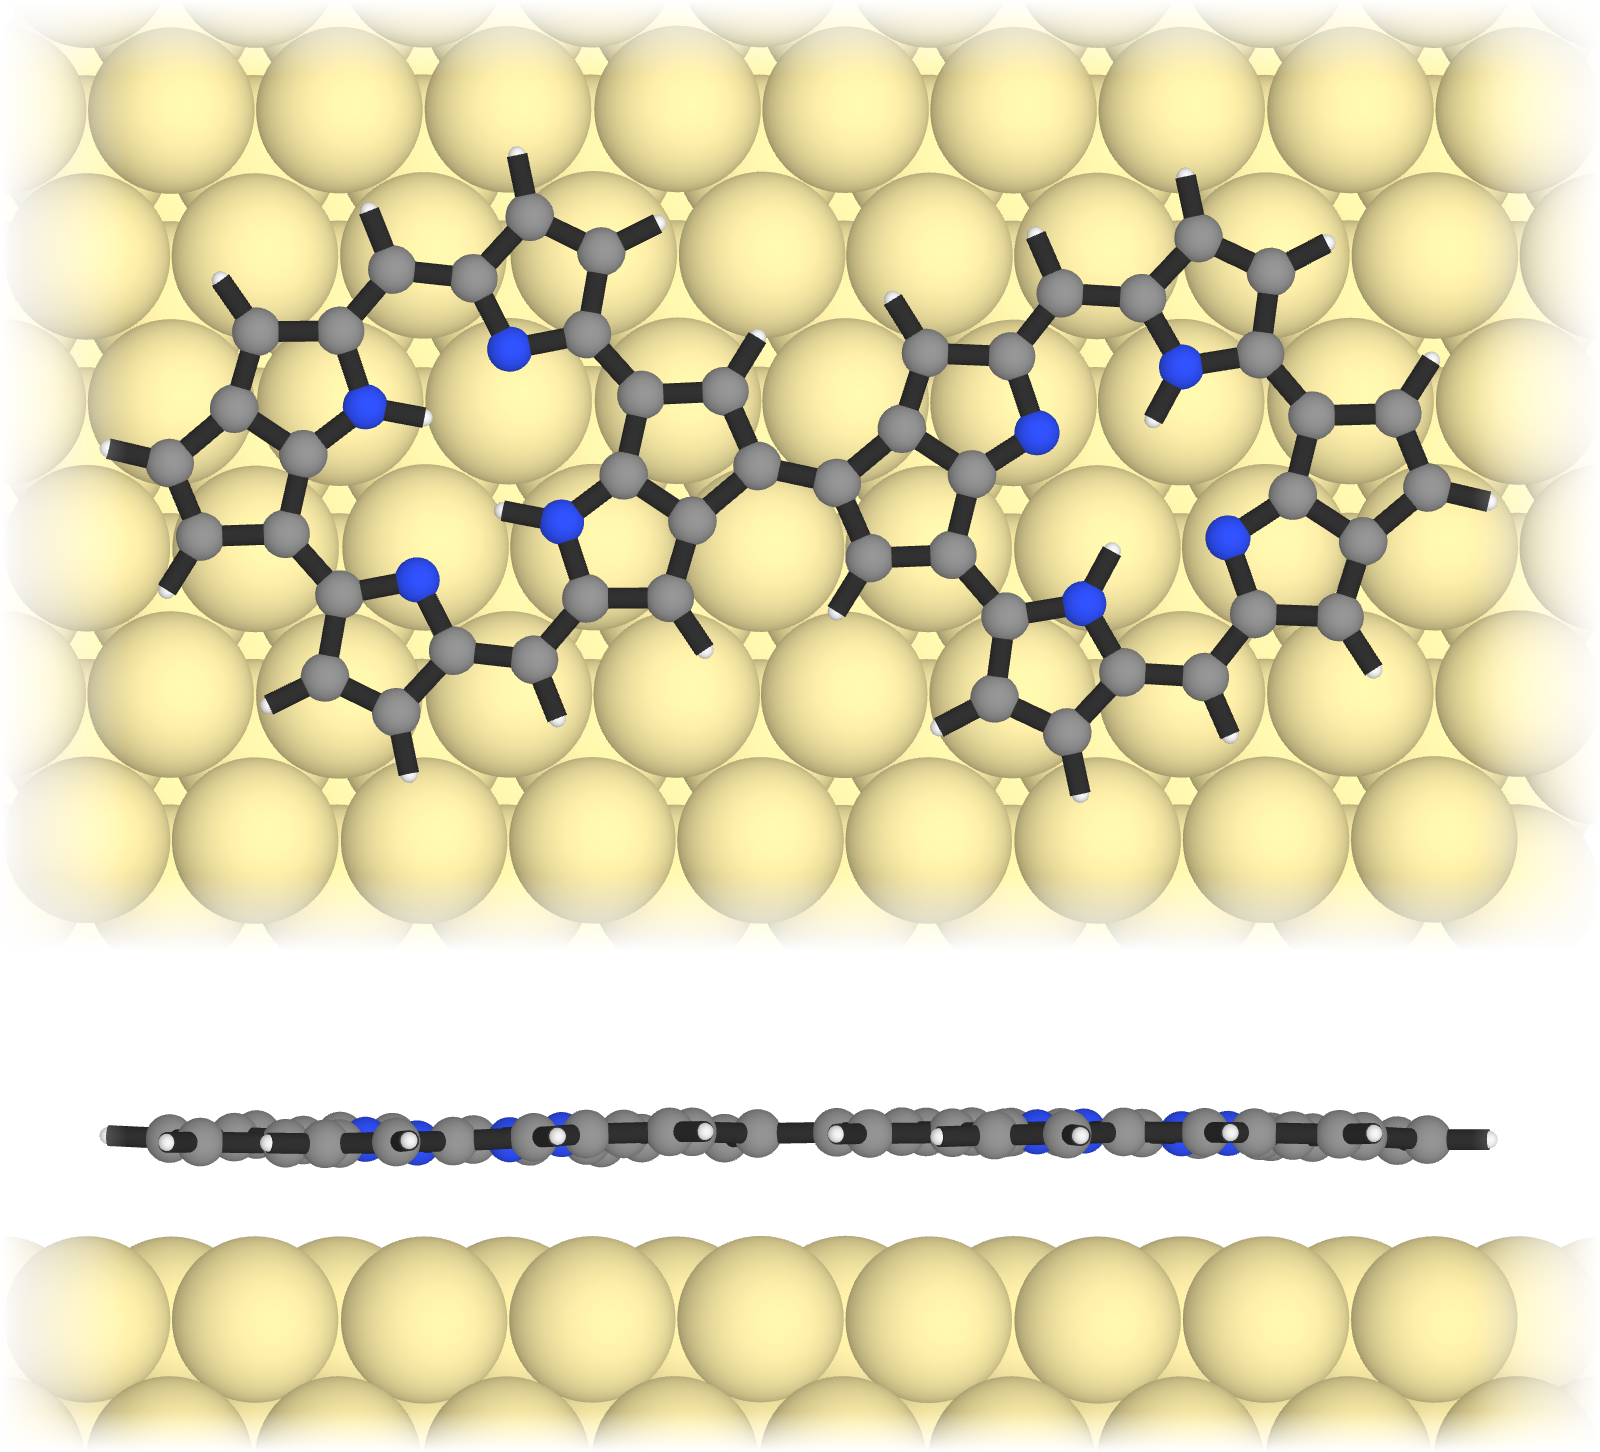 Molecule visualization top and side view